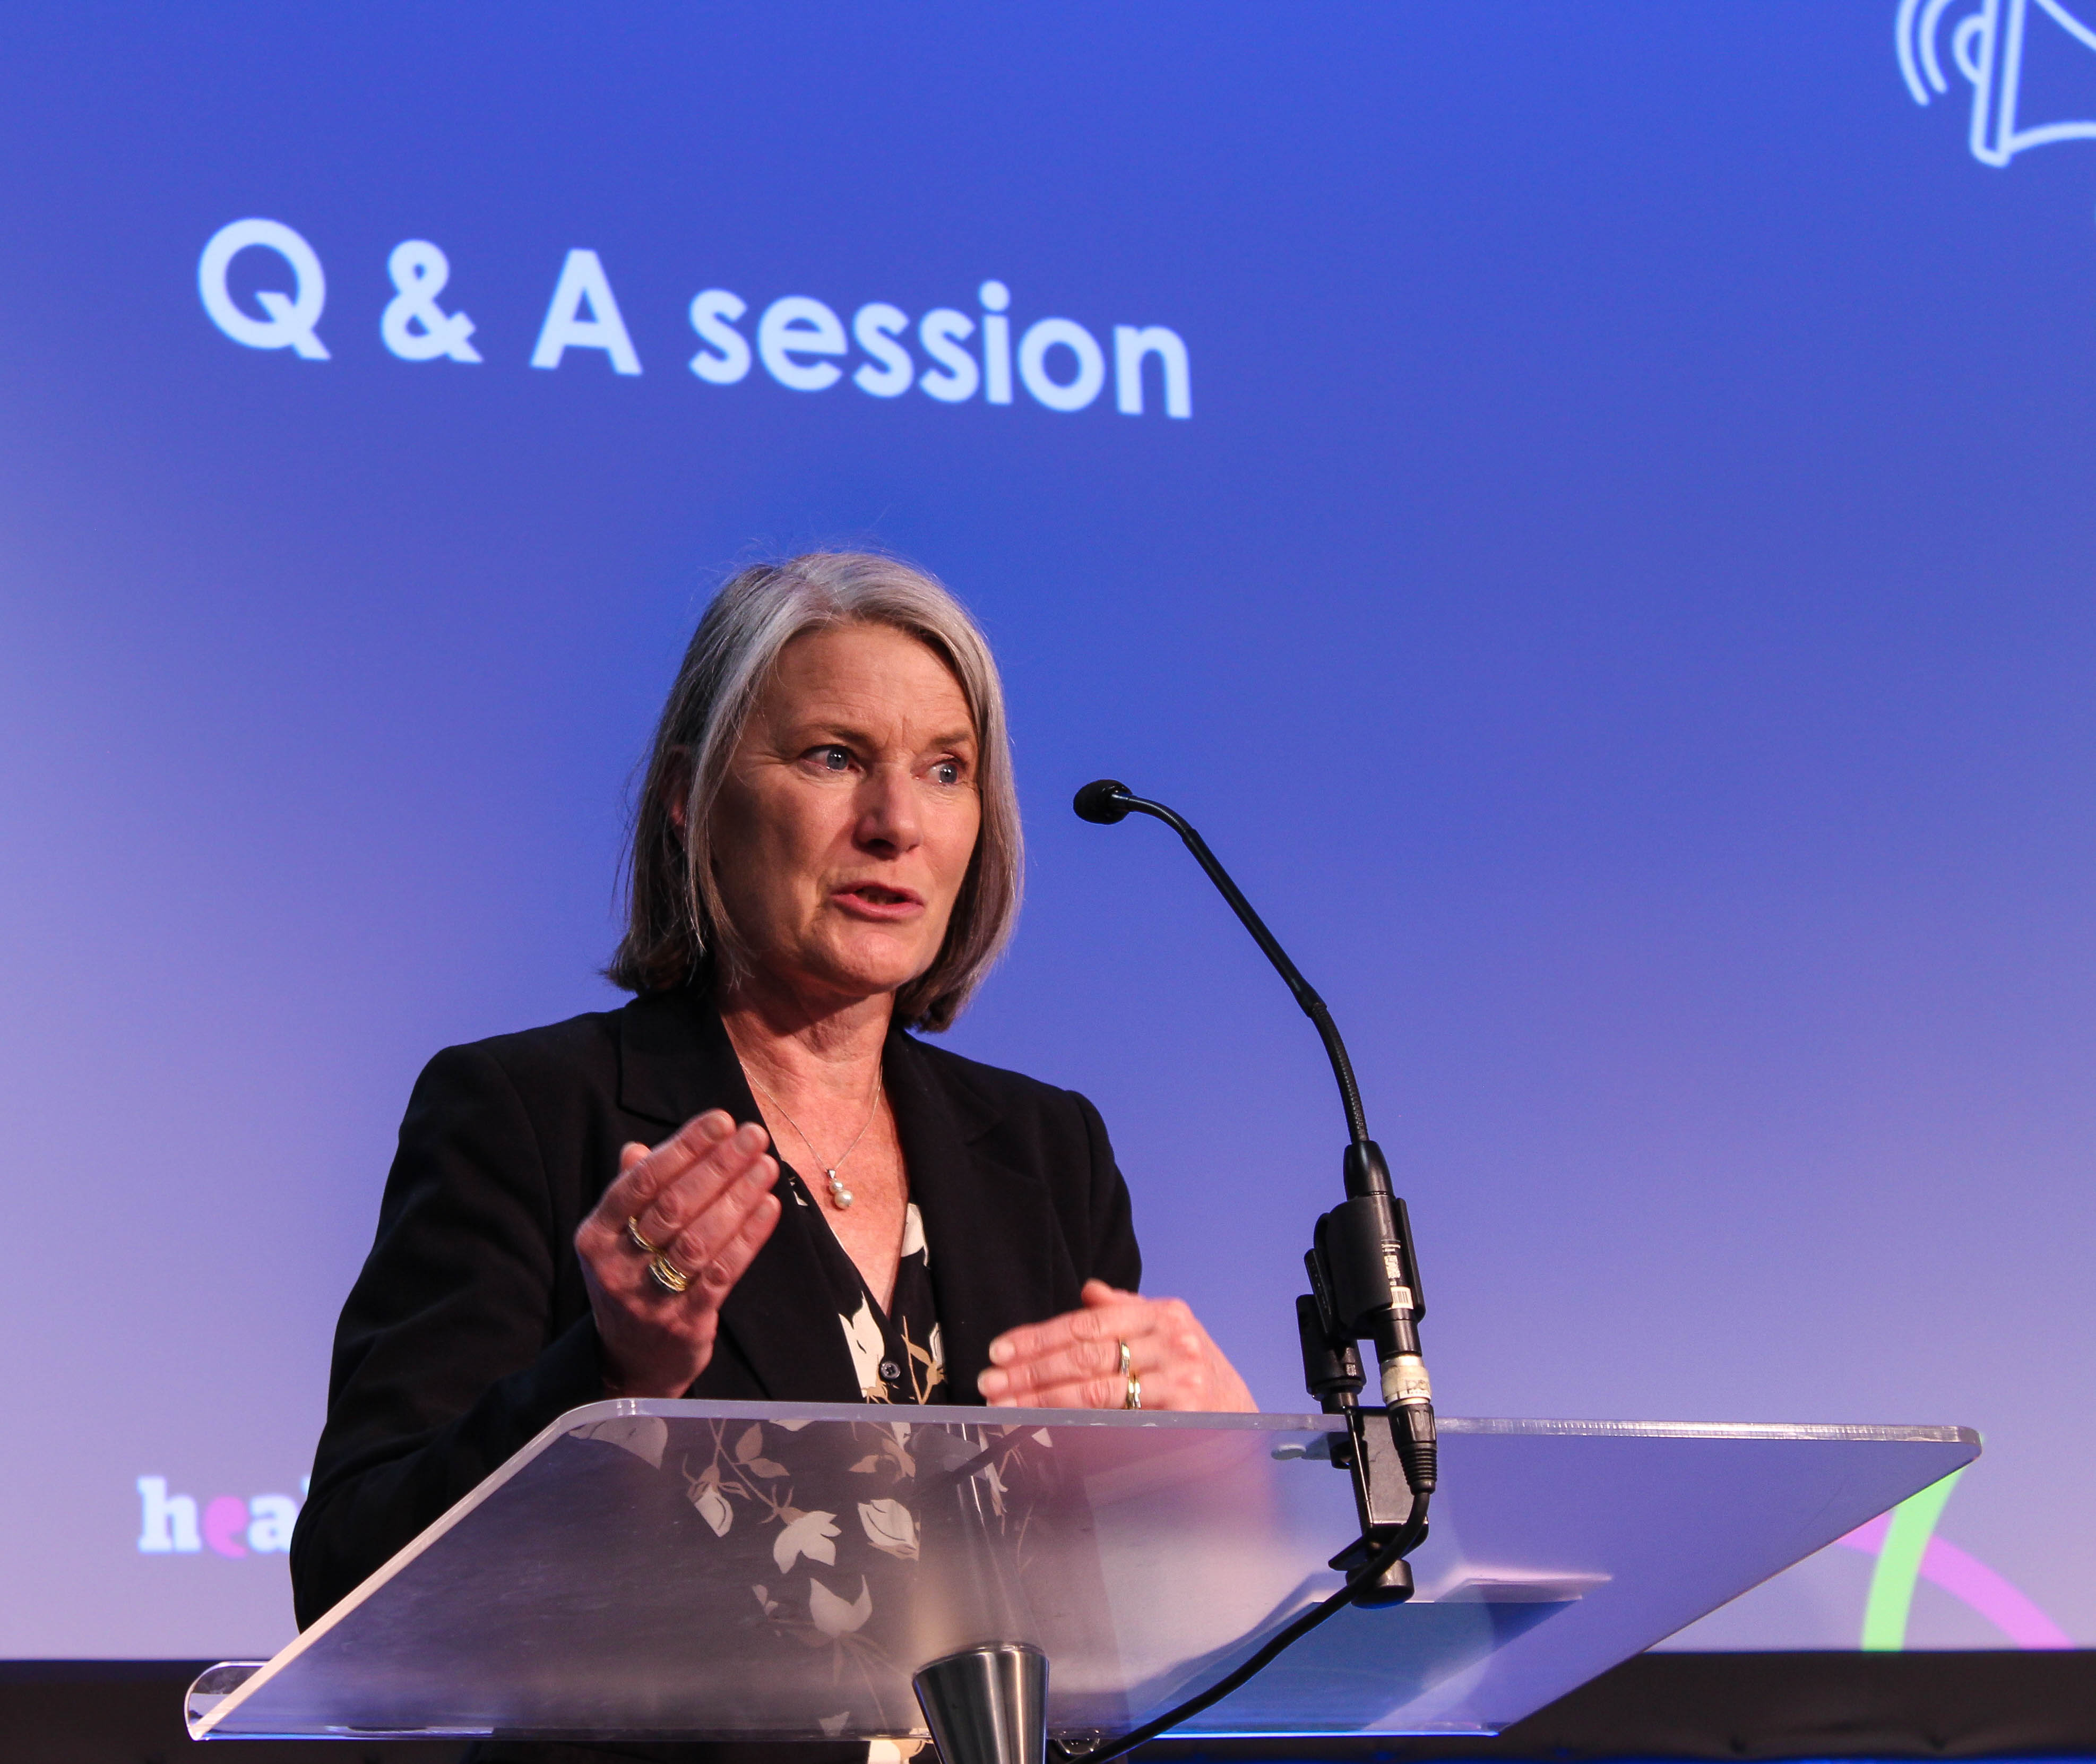 Sarah Pickup, Acting Chief Executive of the Local Government Association